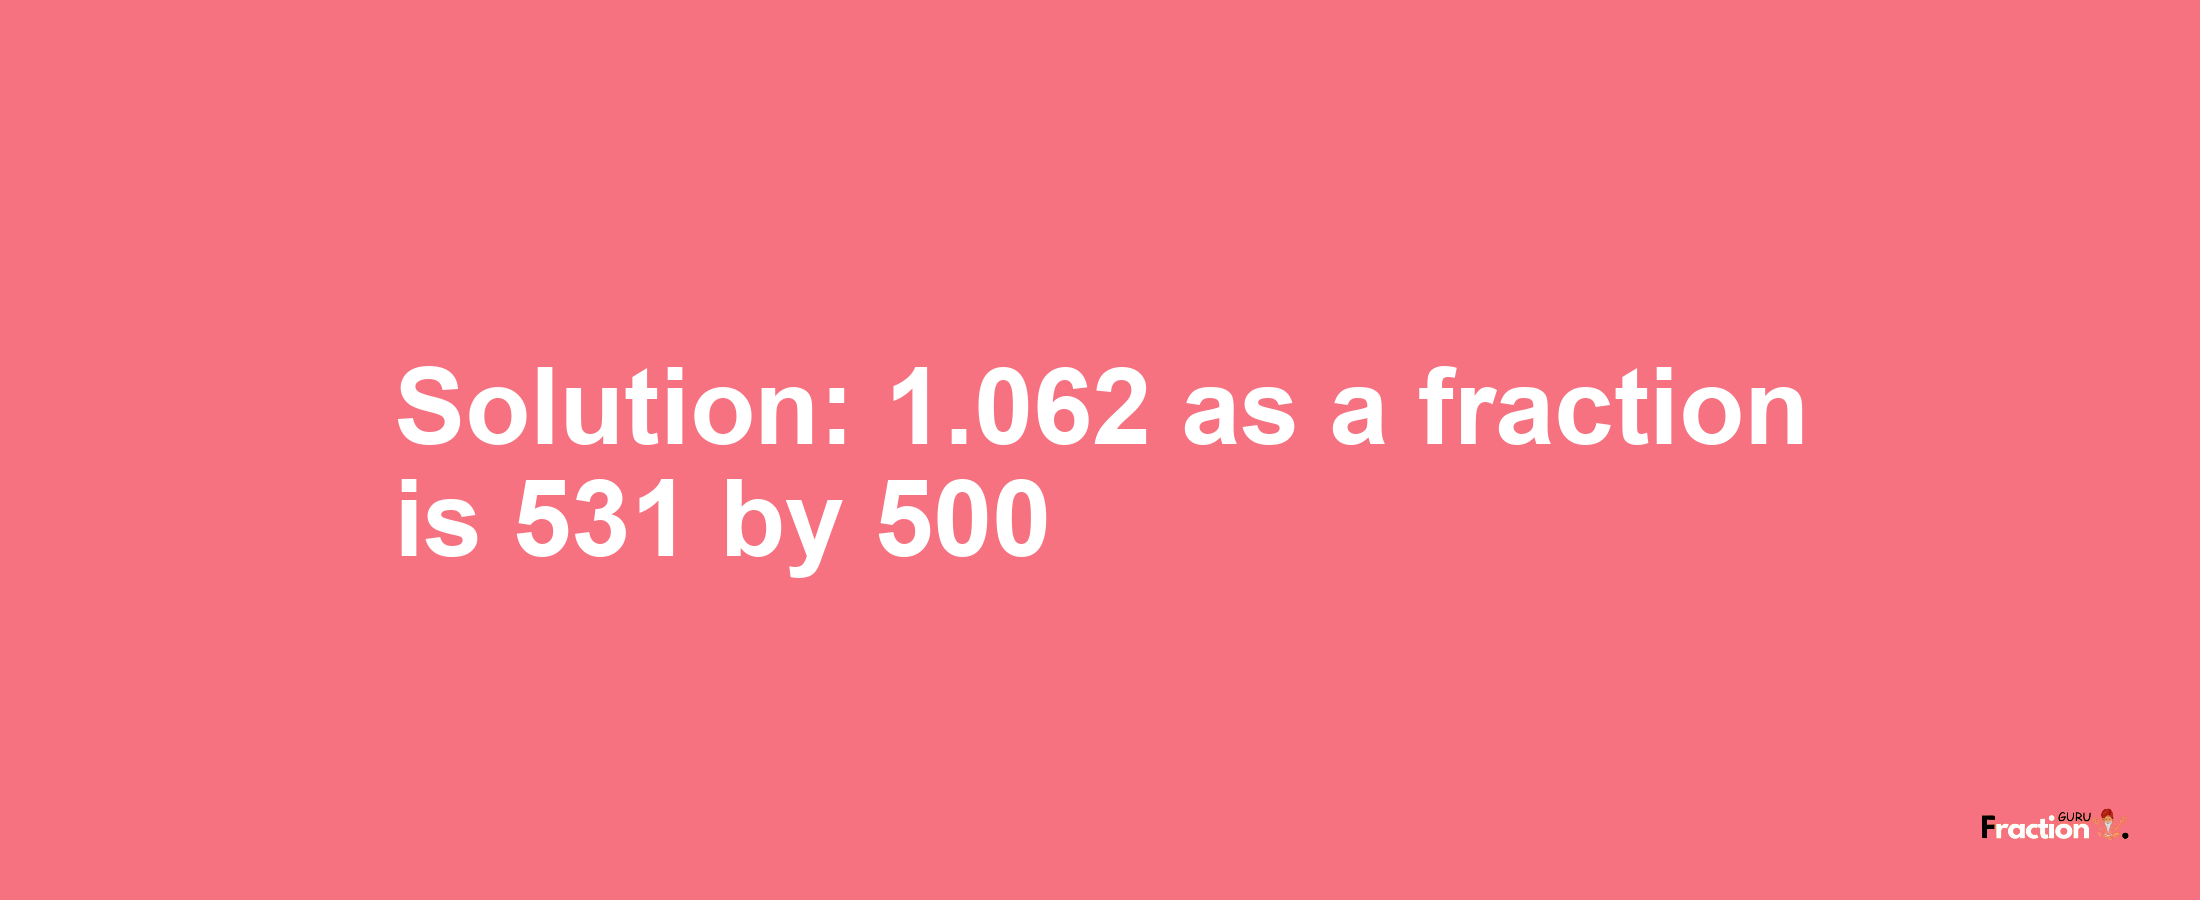 Solution:1.062 as a fraction is 531/500